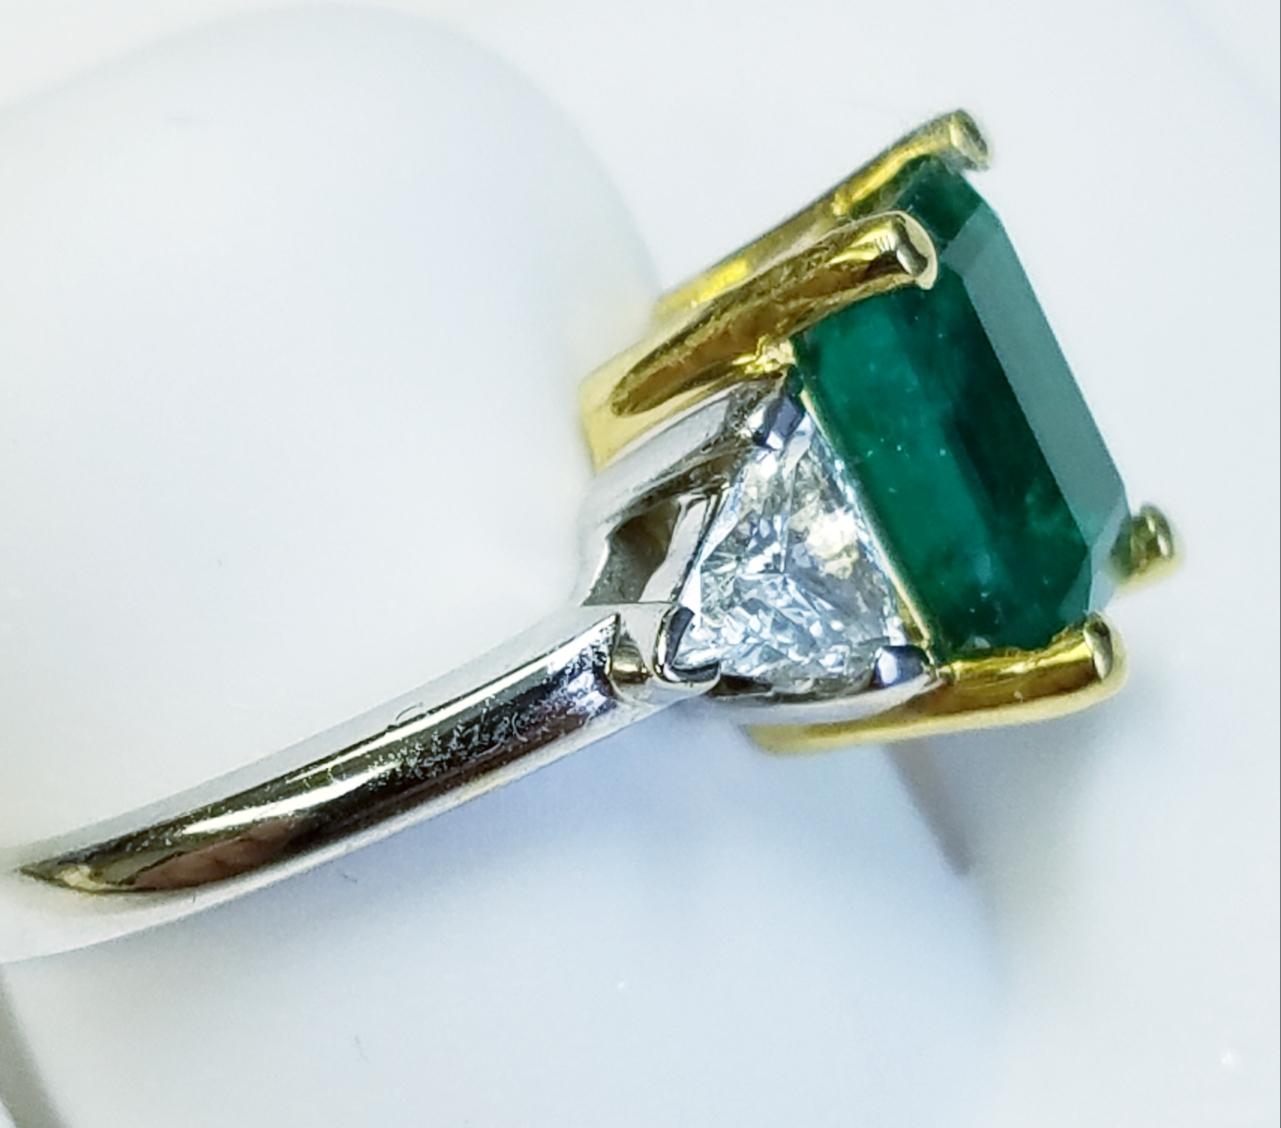 Three Stone 18k White Gold Emerald Cut Emerald and Diamond Ring
2.14 carats of Emeralds
0.51 carats of Diamonds
Emerald Cut
18k White Gold